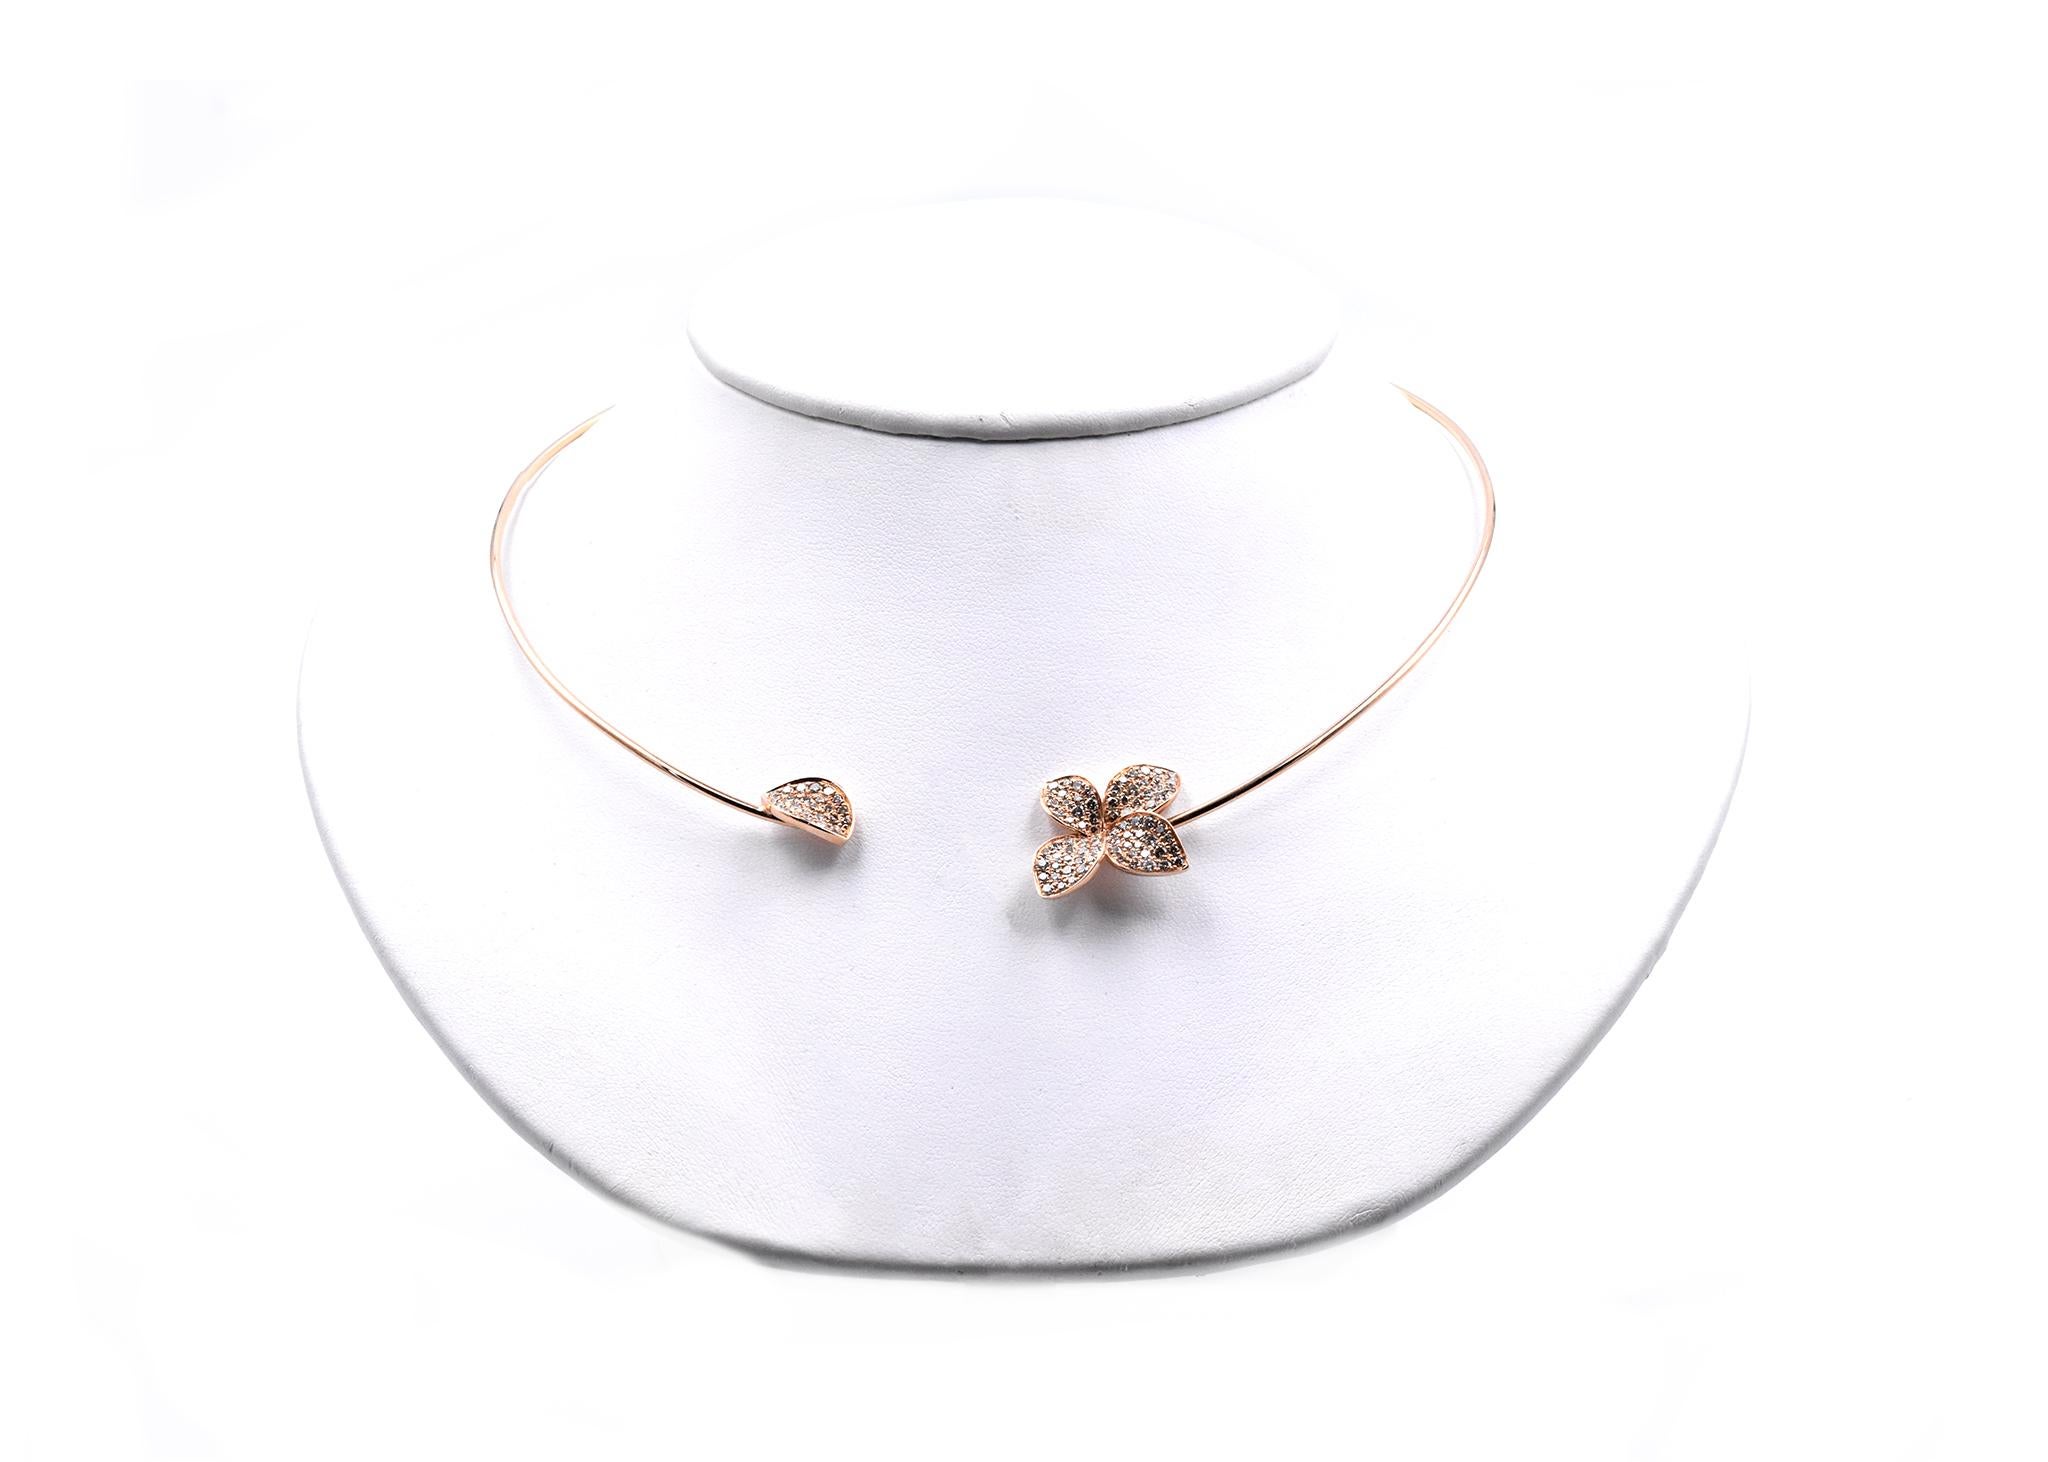 Designer: custom
Material: 18K rose gold
Diamonds: 153 round cut = 2.38cttw
Color: G
Clarity: VS
Dimensions: collar measures 16-inches
Weight: 1.70 grams
